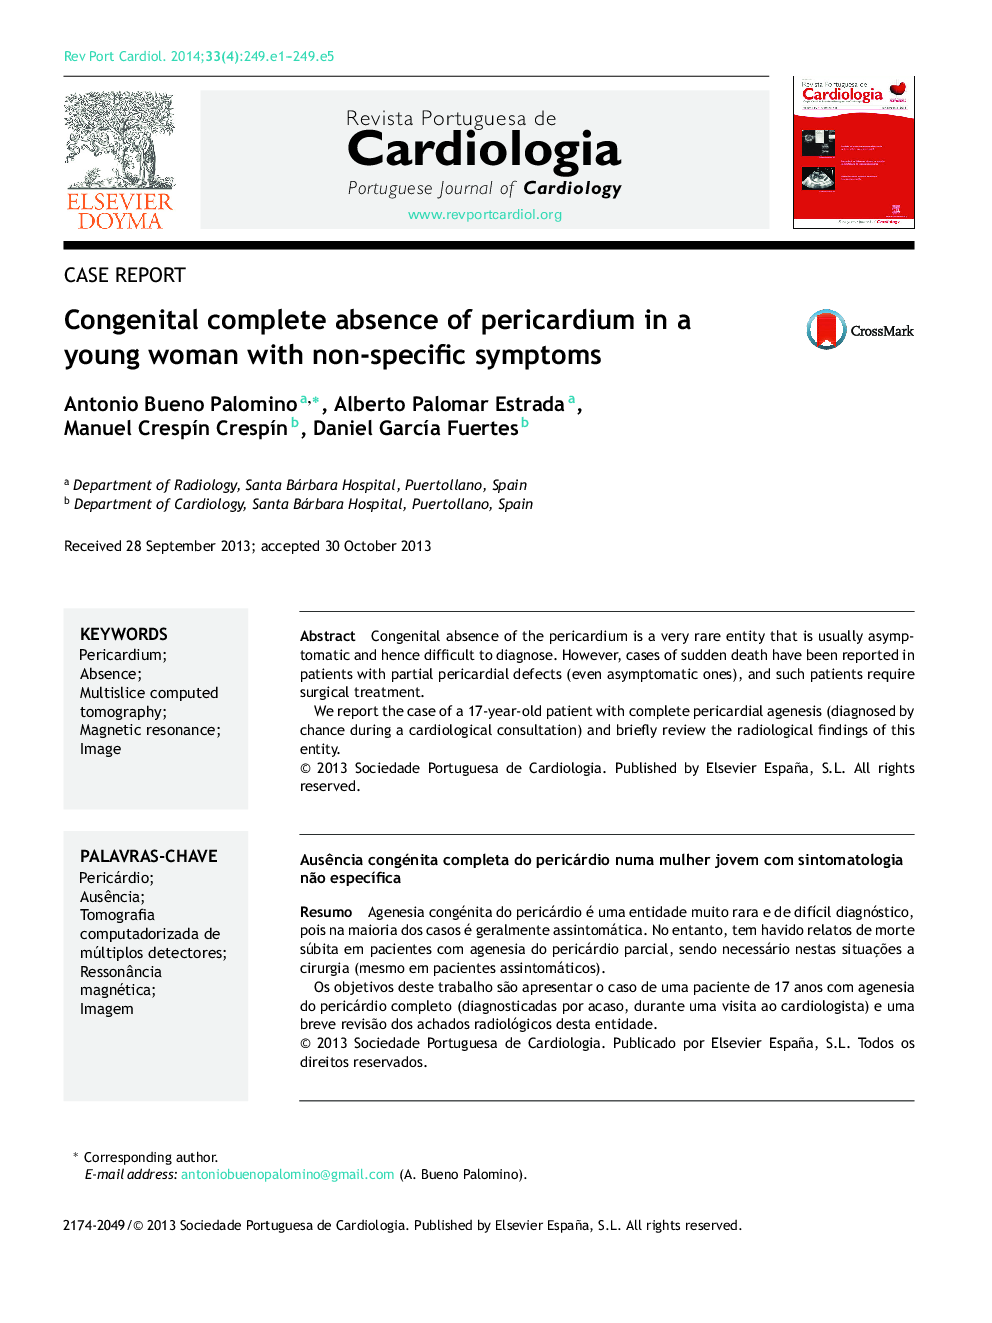 Congenital complete absence of pericardium in a young woman with nonâspecific symptoms